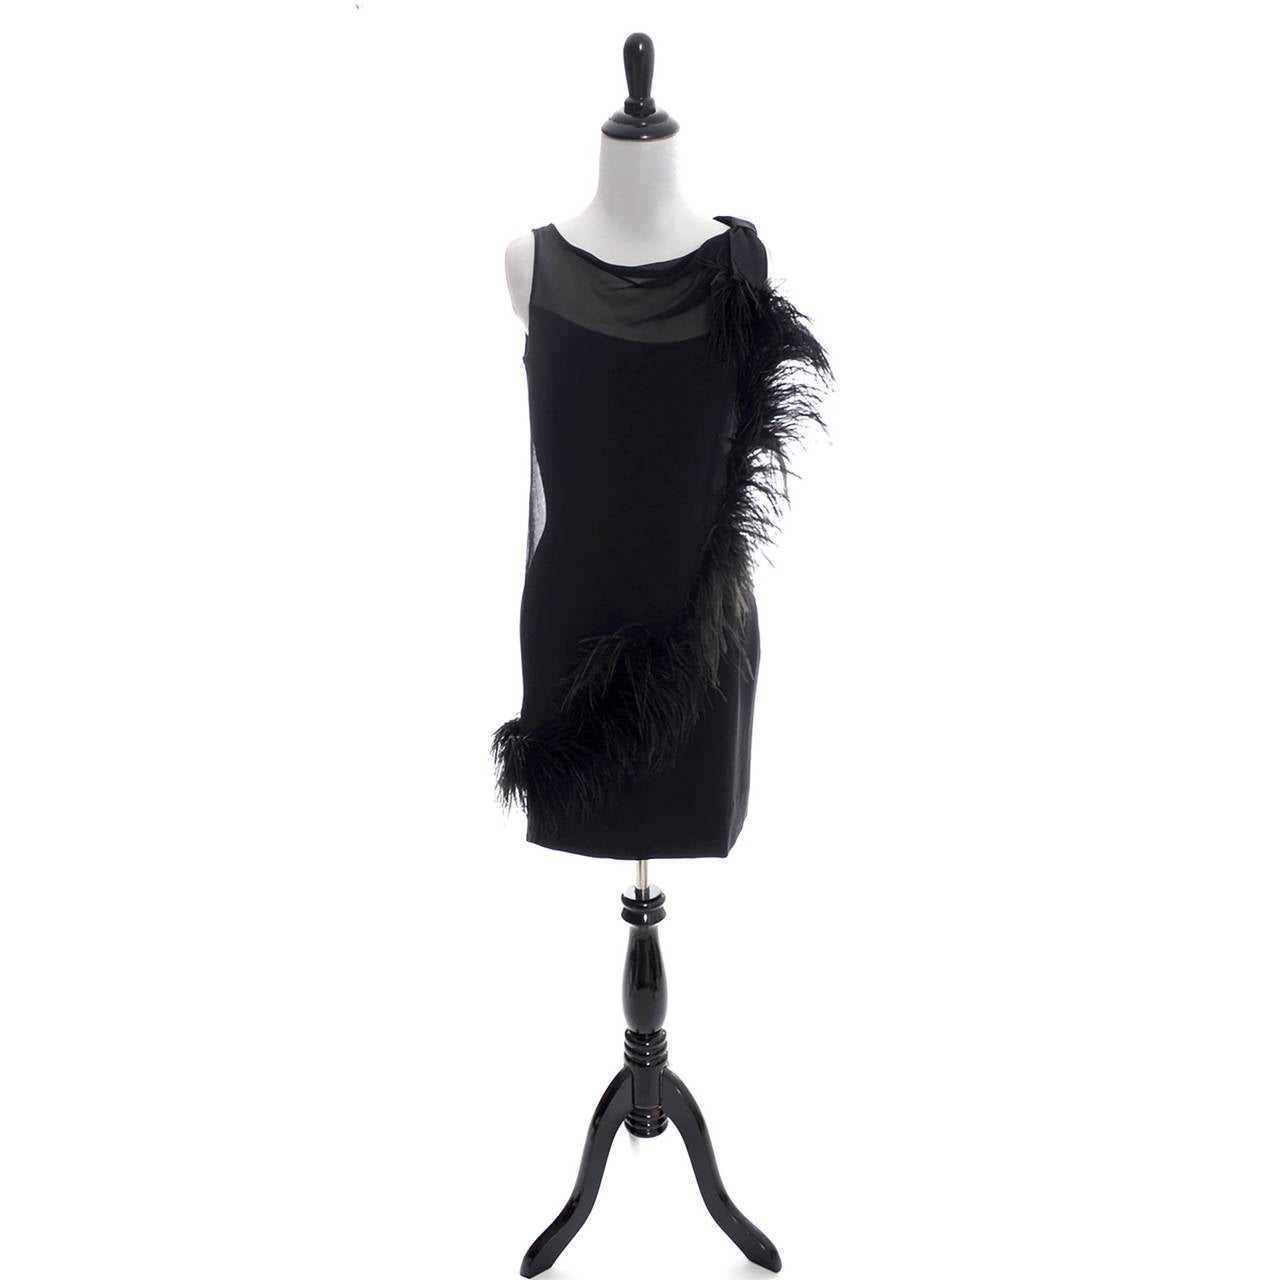 This vintage late 1960's or early 1970's little black dress with illusion bodice is from Lilli Diamond and it is in excellent condition. The silk crepe sleeveless under dress has a pretty sheer overlay that is trimmed with amazing black feathers.